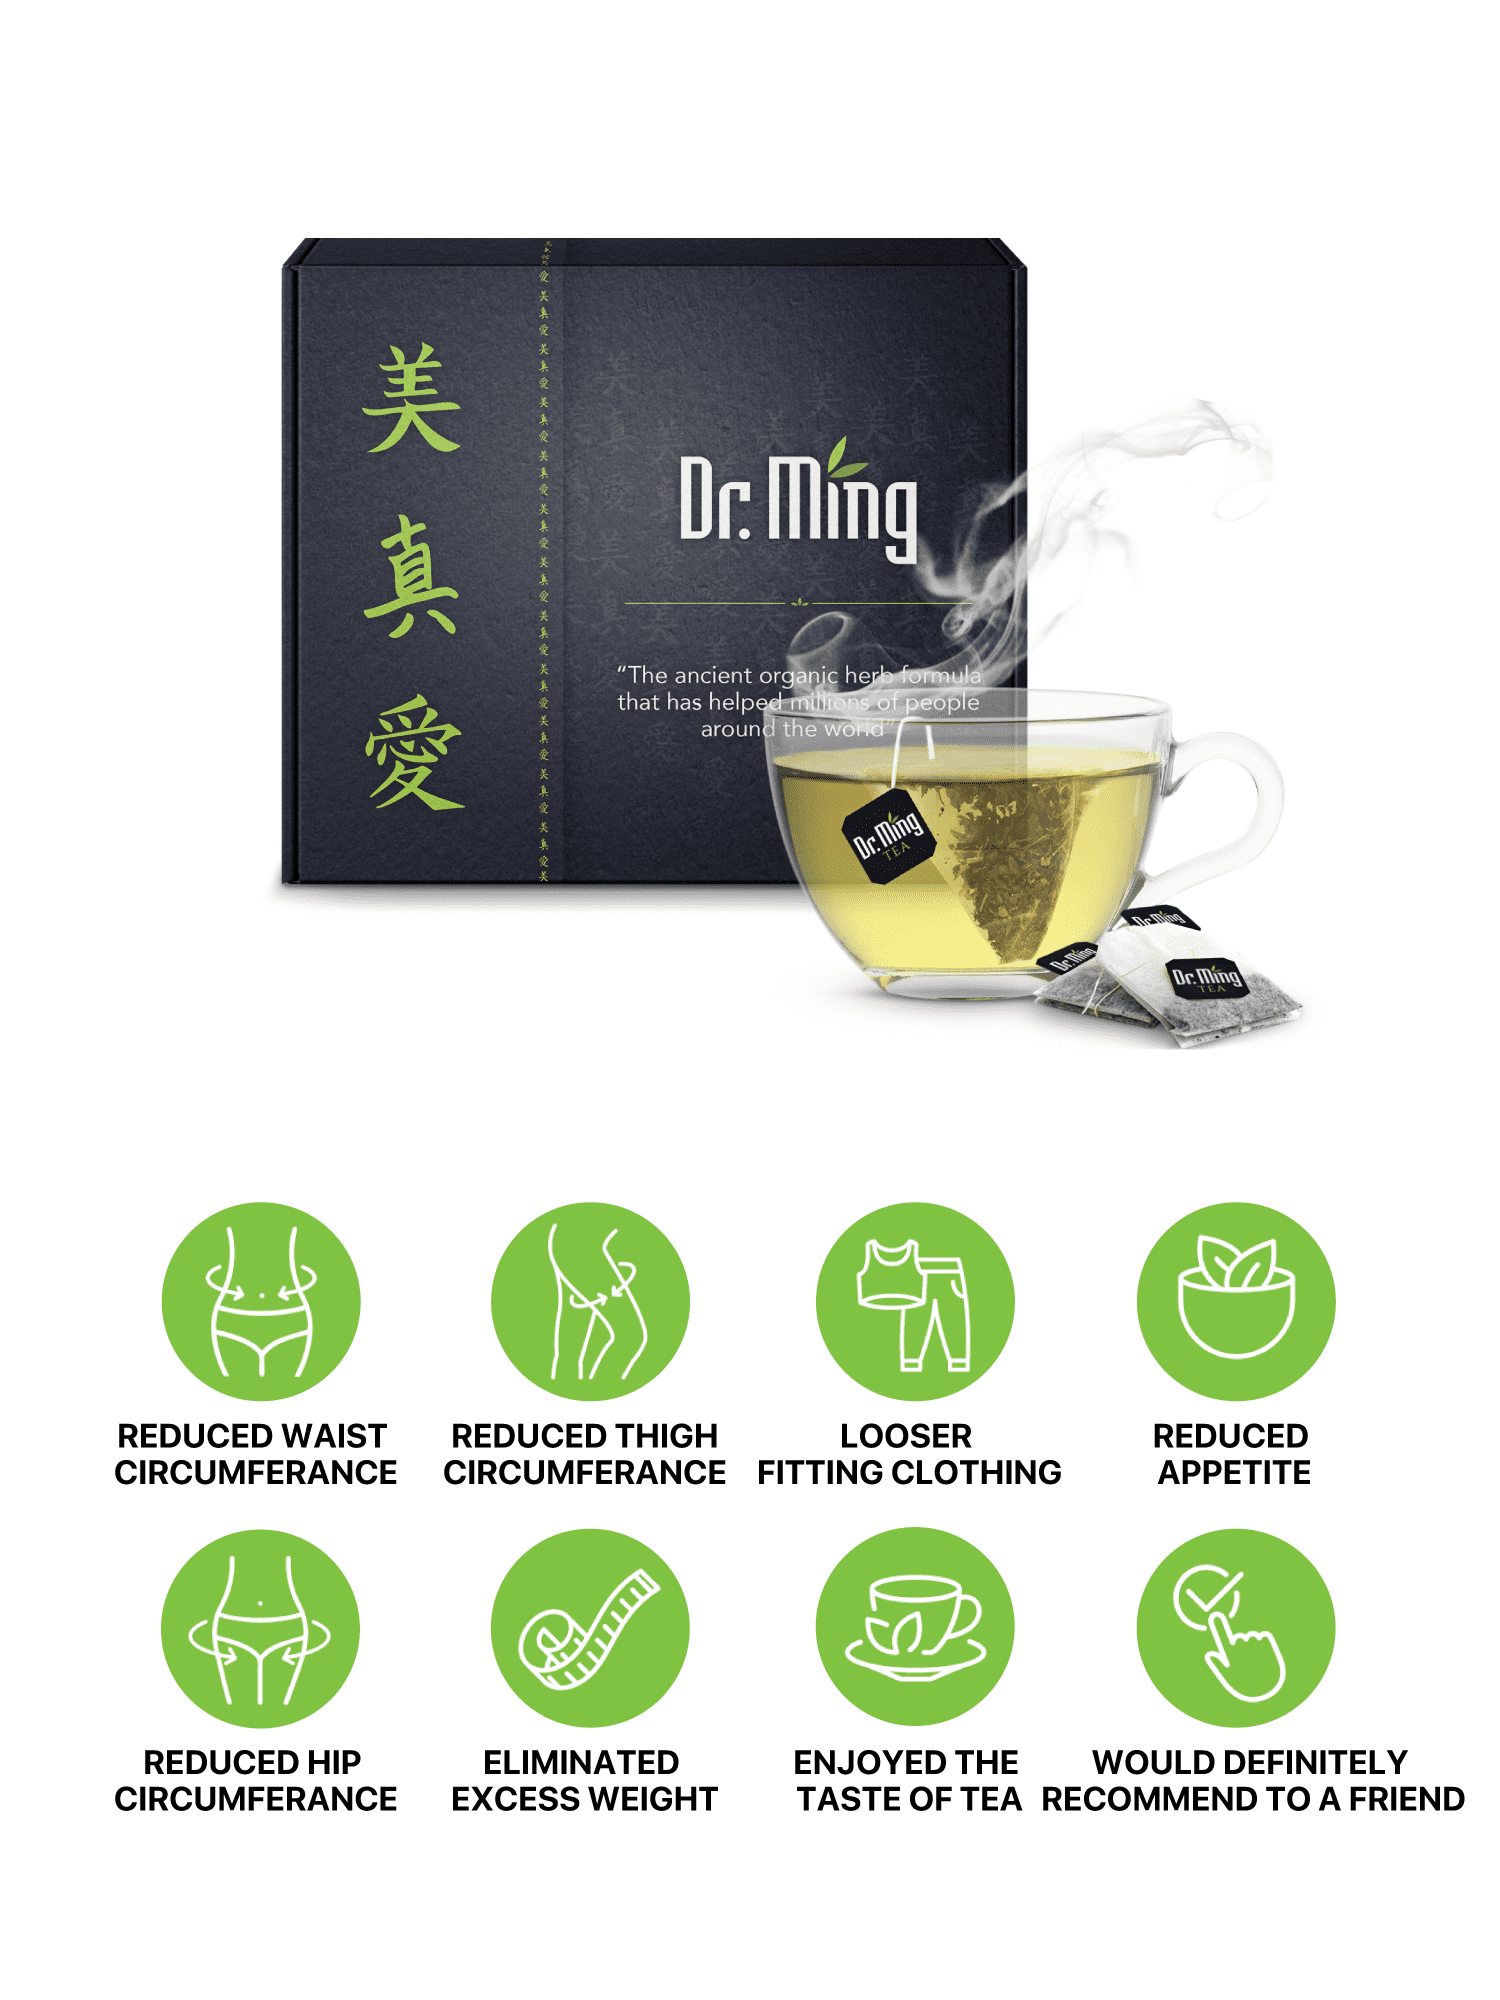 Dr. Ming Tea  The Best Way To Lose Weight With Natural Detox Formula